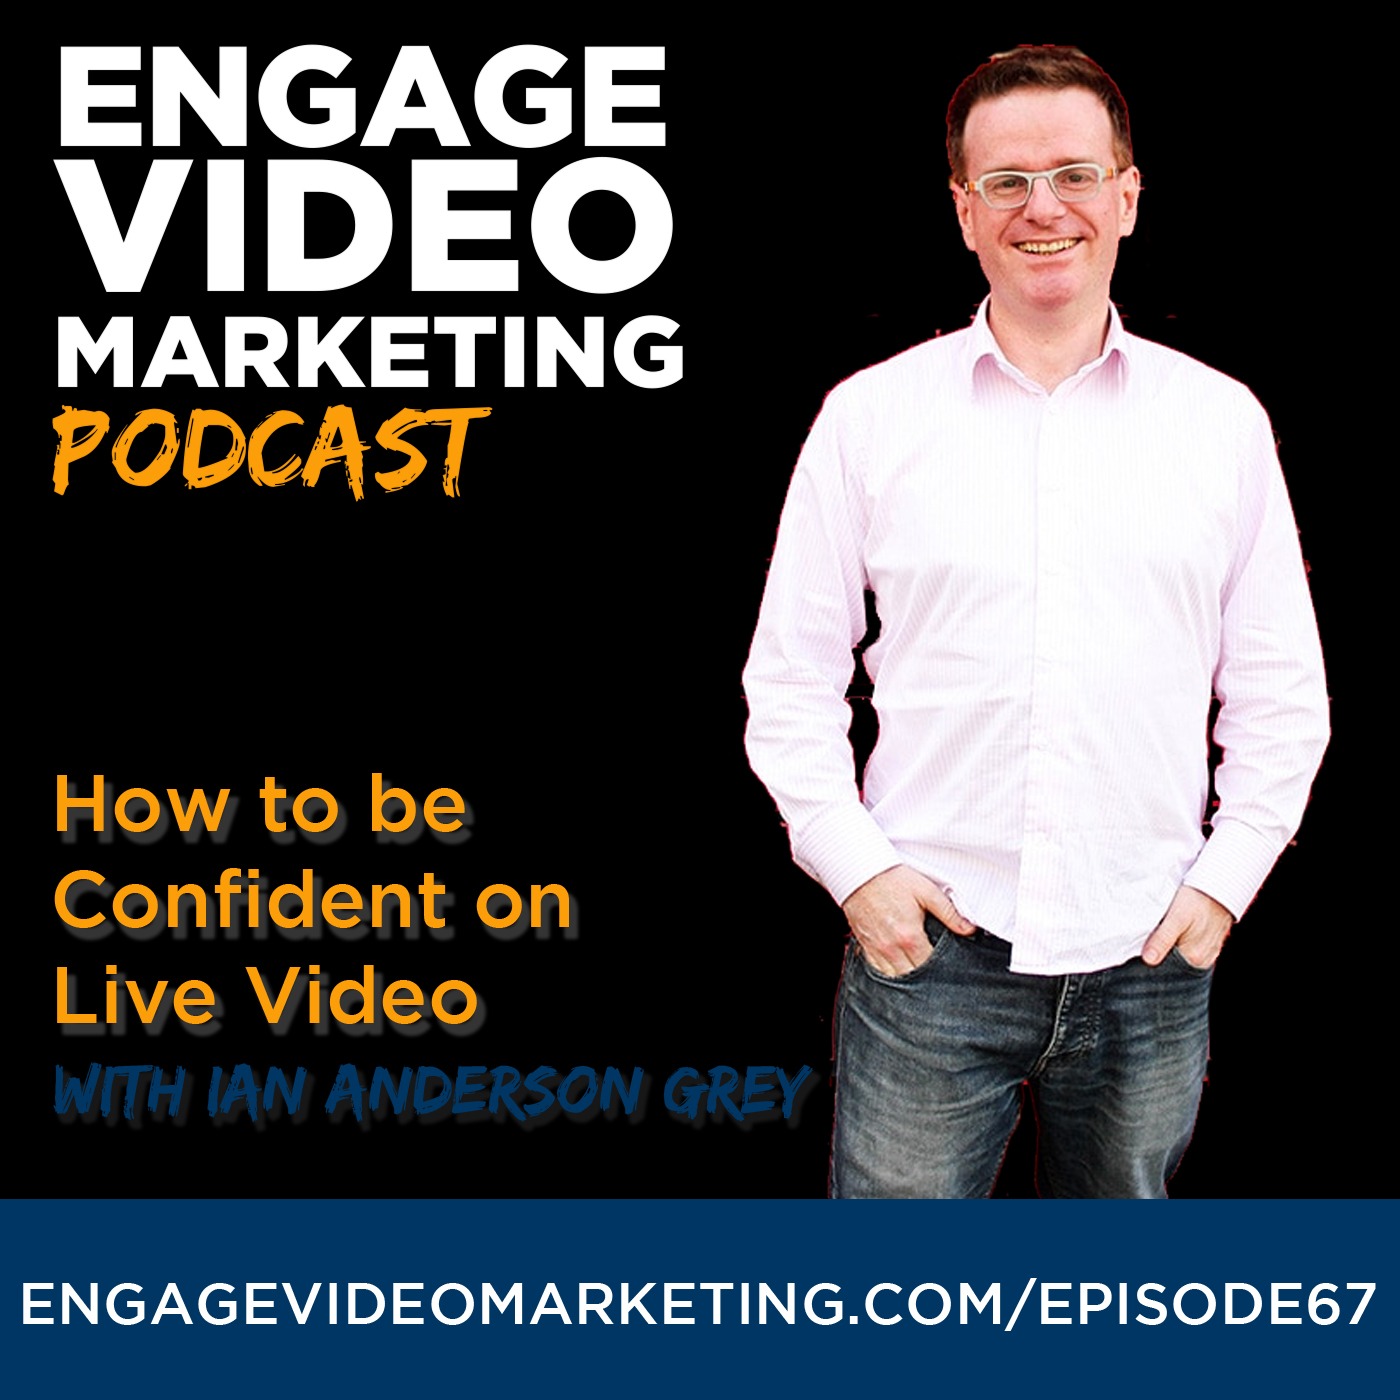 How to be Confident on Live Video with Ian Anderson Grey